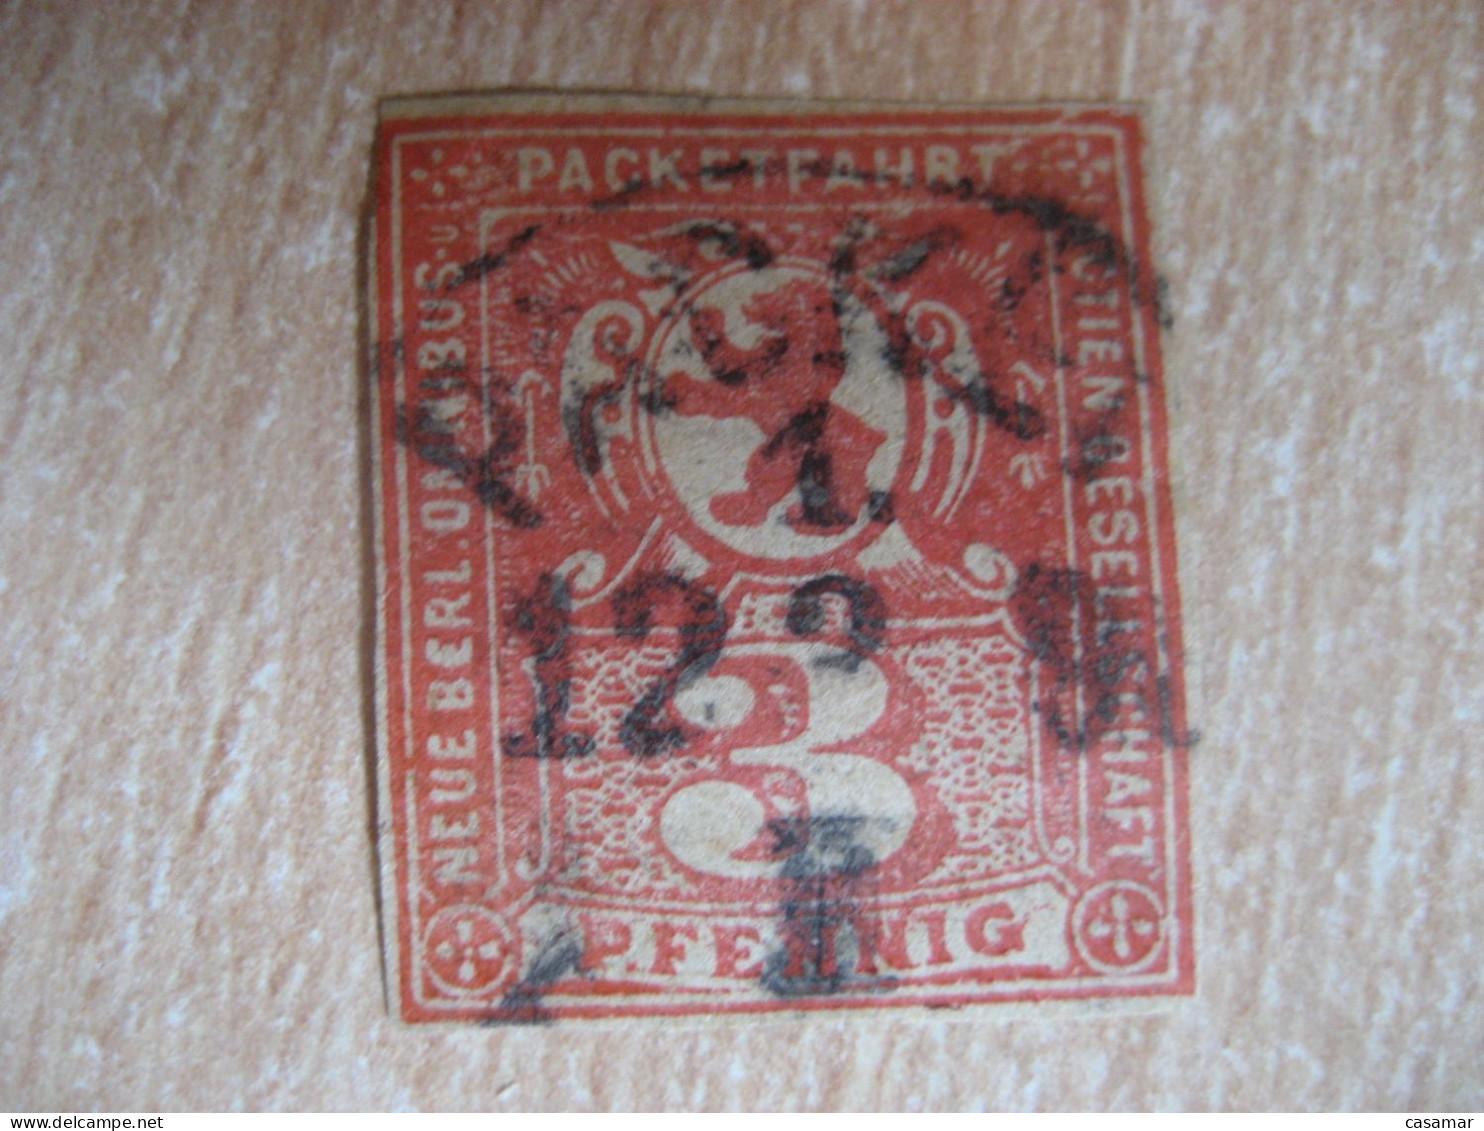 BERLIN Packetfahrt Neu Berl. Omnibus 3 Pf Red Imperforated Michel ??? Privat Private Local Stamp GERMANY Slight Faults - Postes Privées & Locales